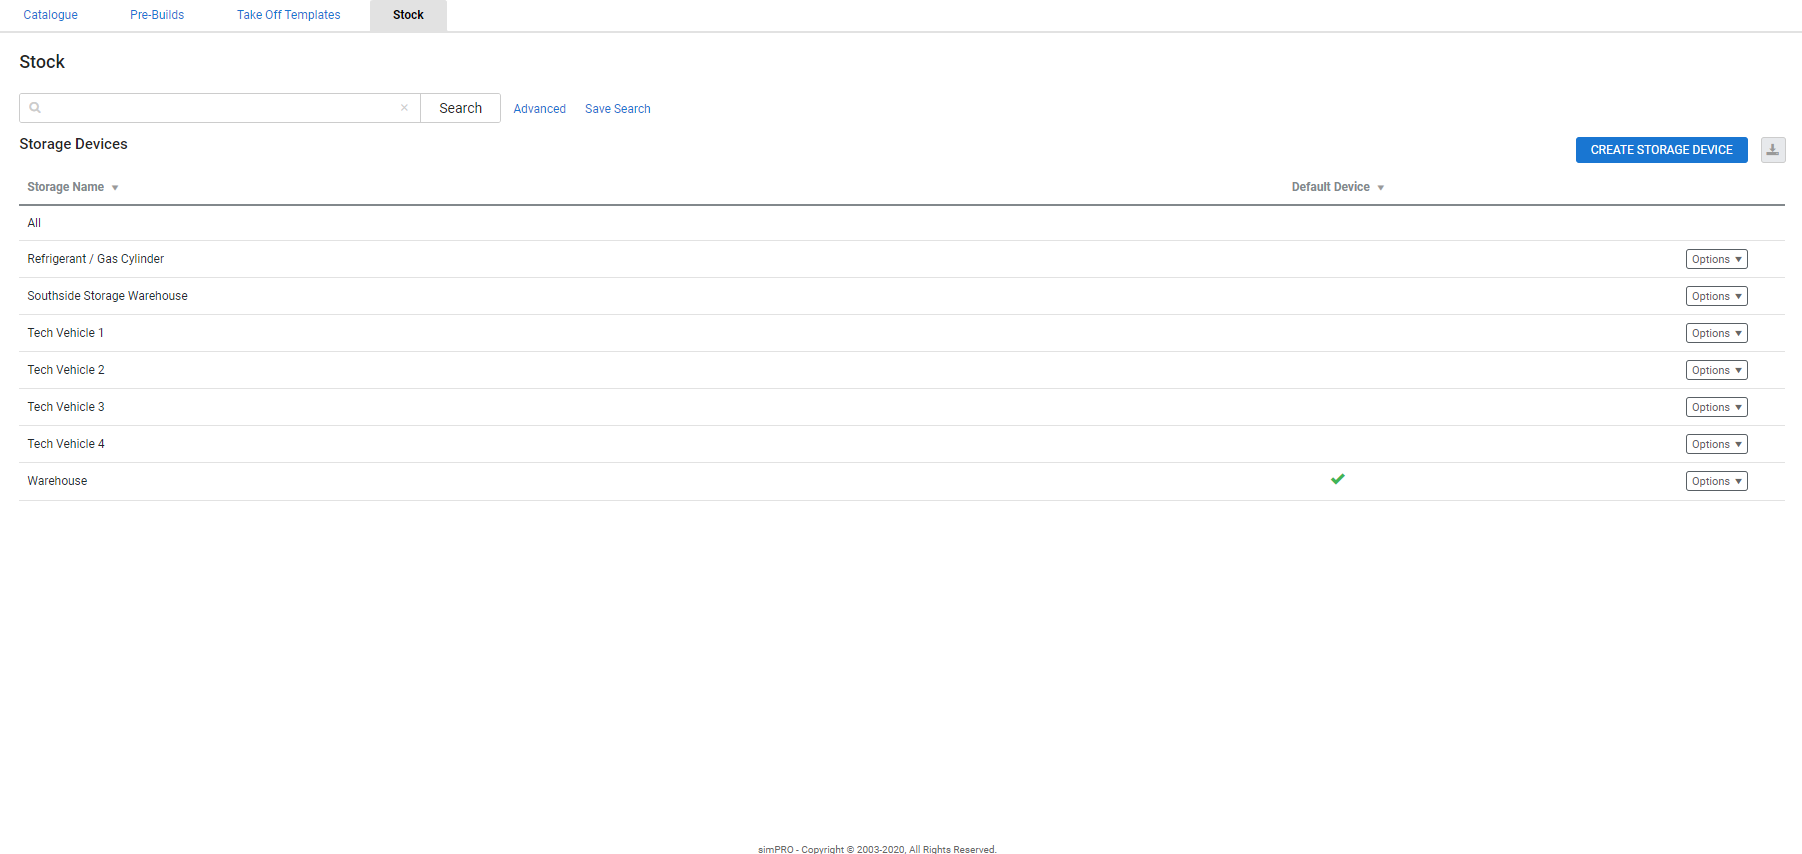 A screenshot of the Advanced search in the stock table.